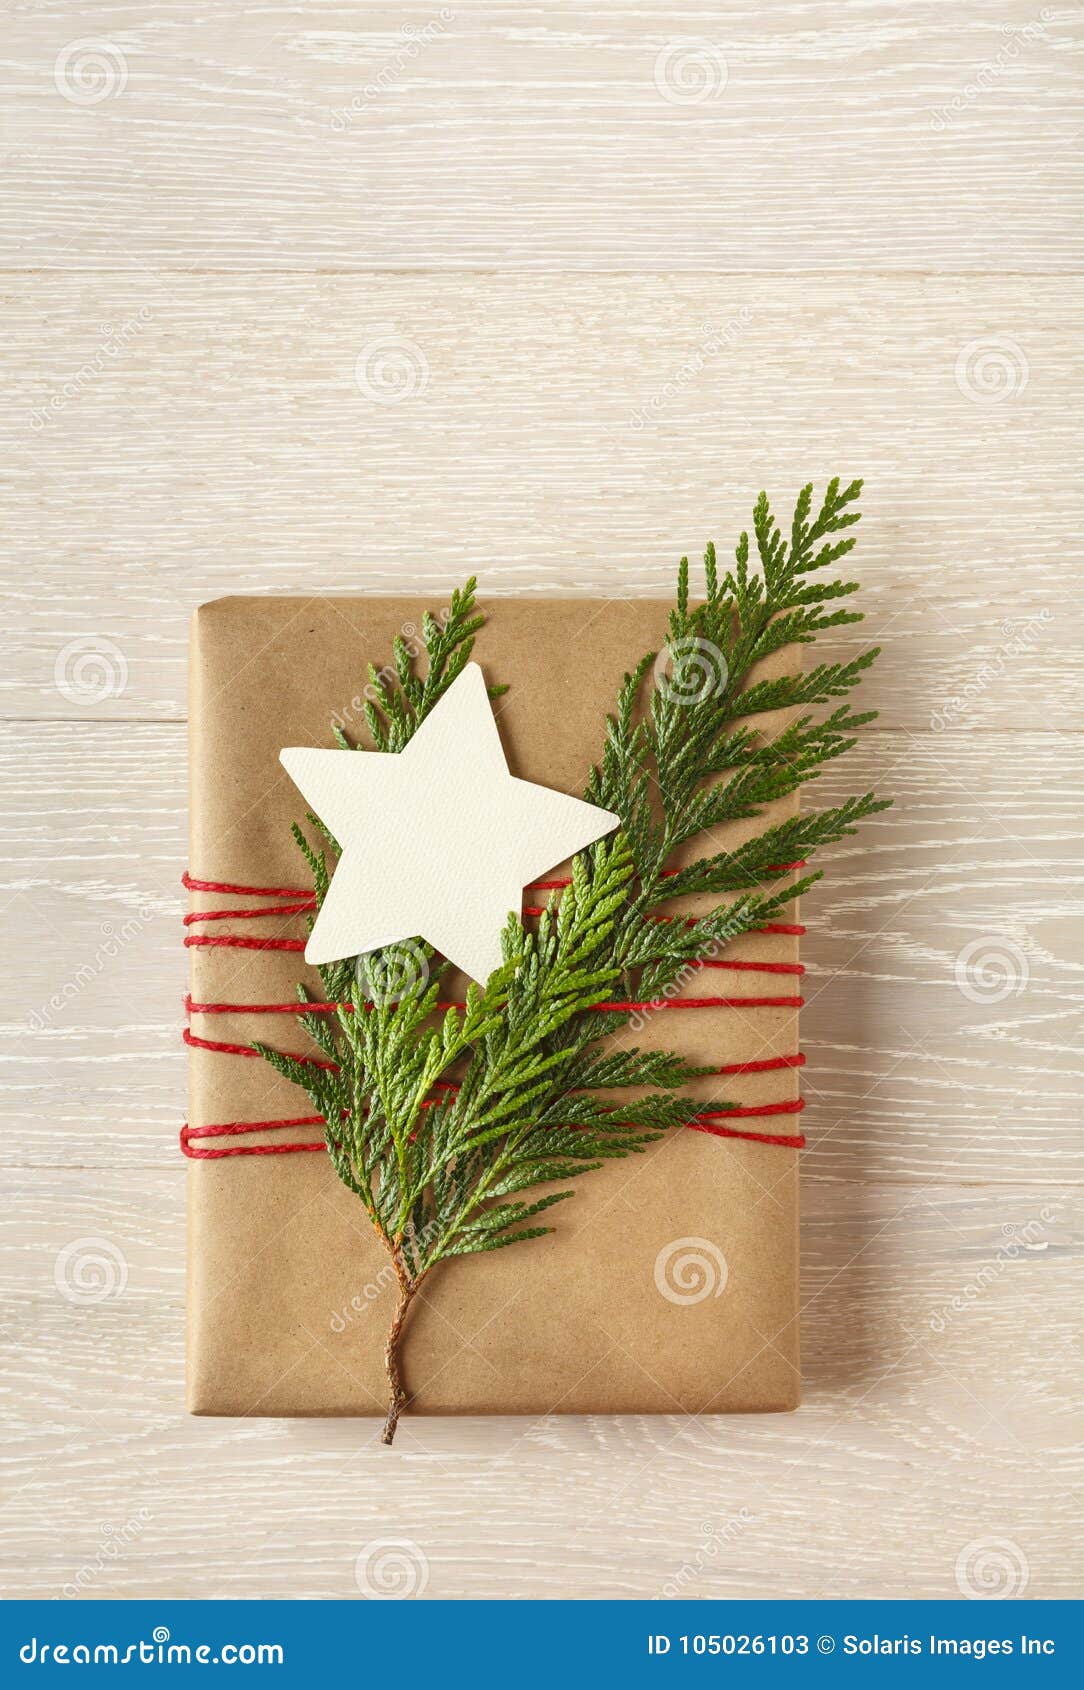 Christmas Gift Present with Recycled Wrapping Paper and Natural Decorations  on Rustic Wood Background Stock Image - Image of life, christmas: 105026103